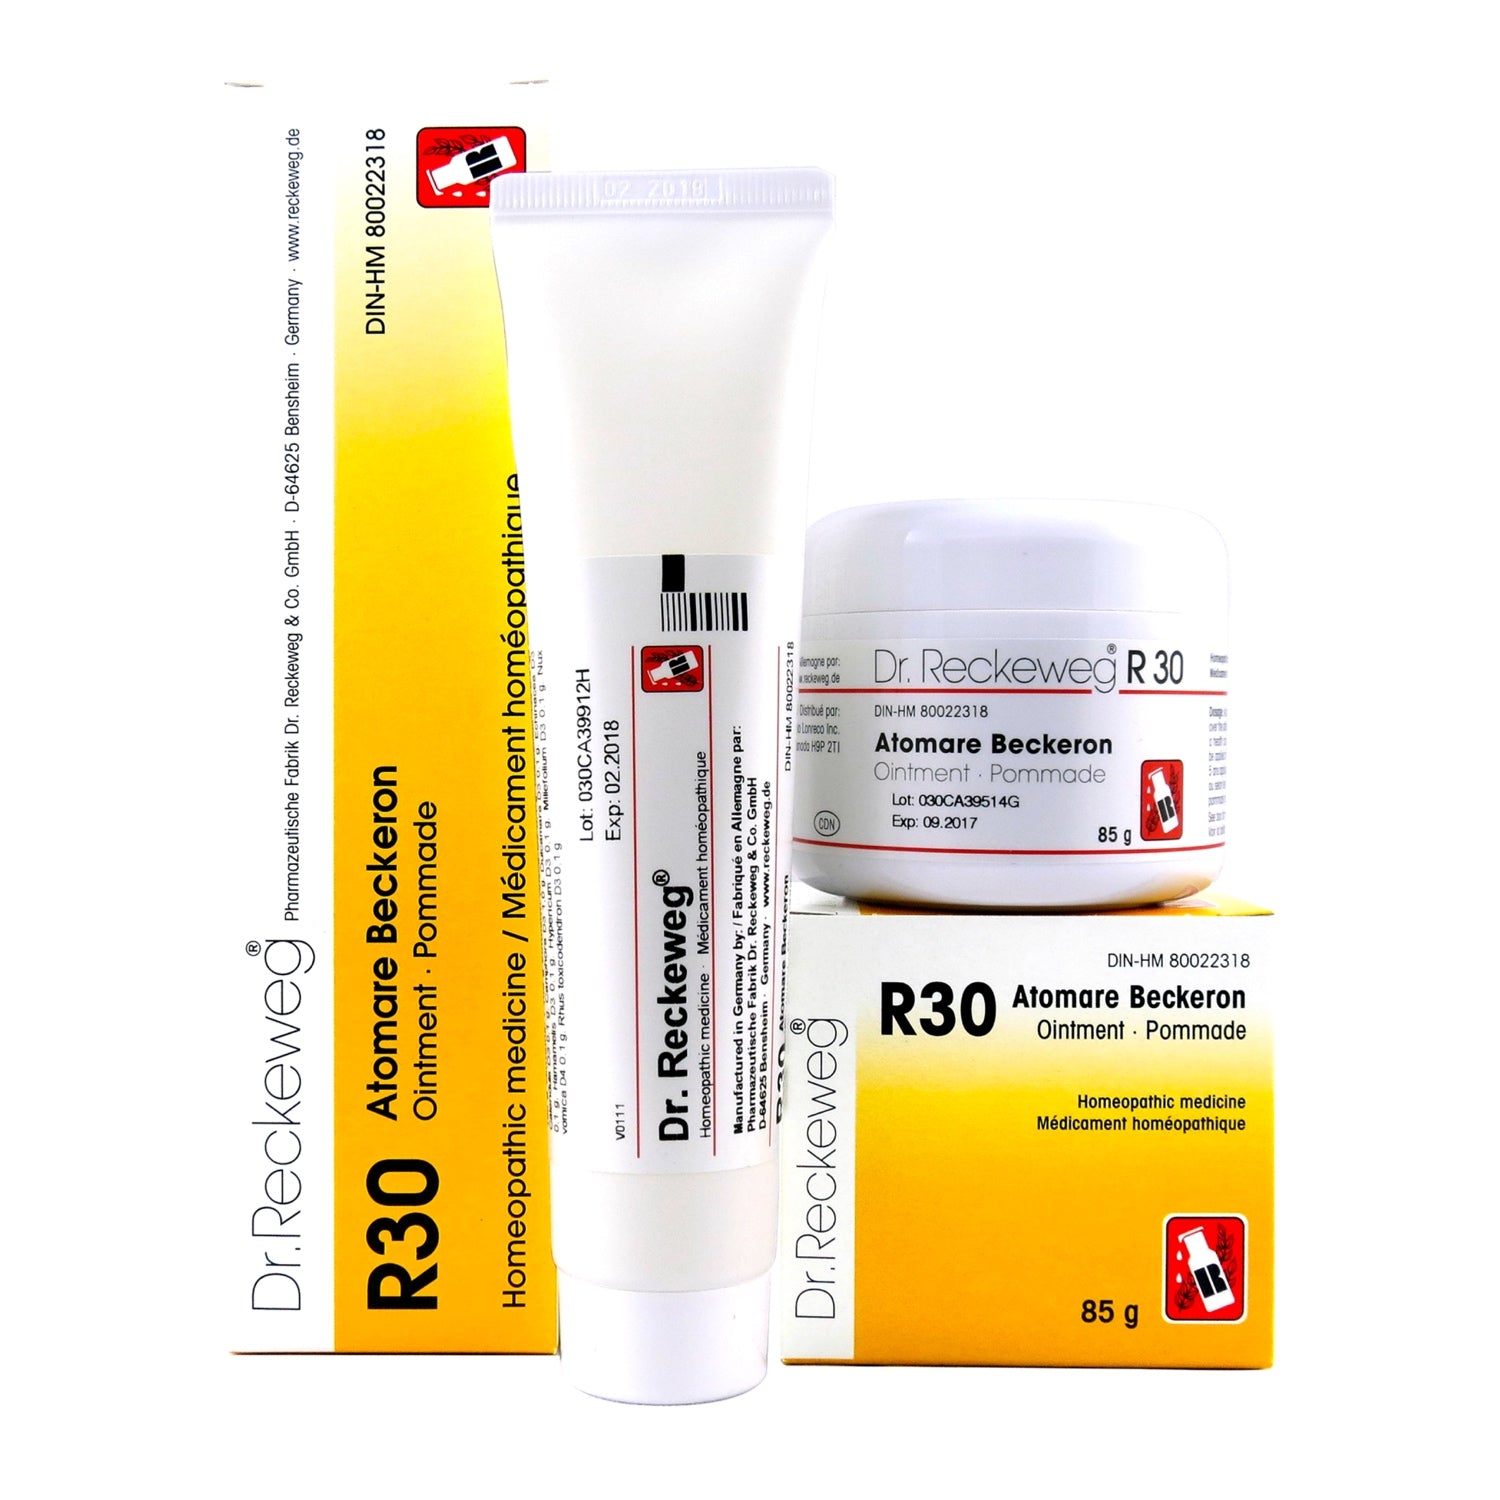 R30 Universal Ointment